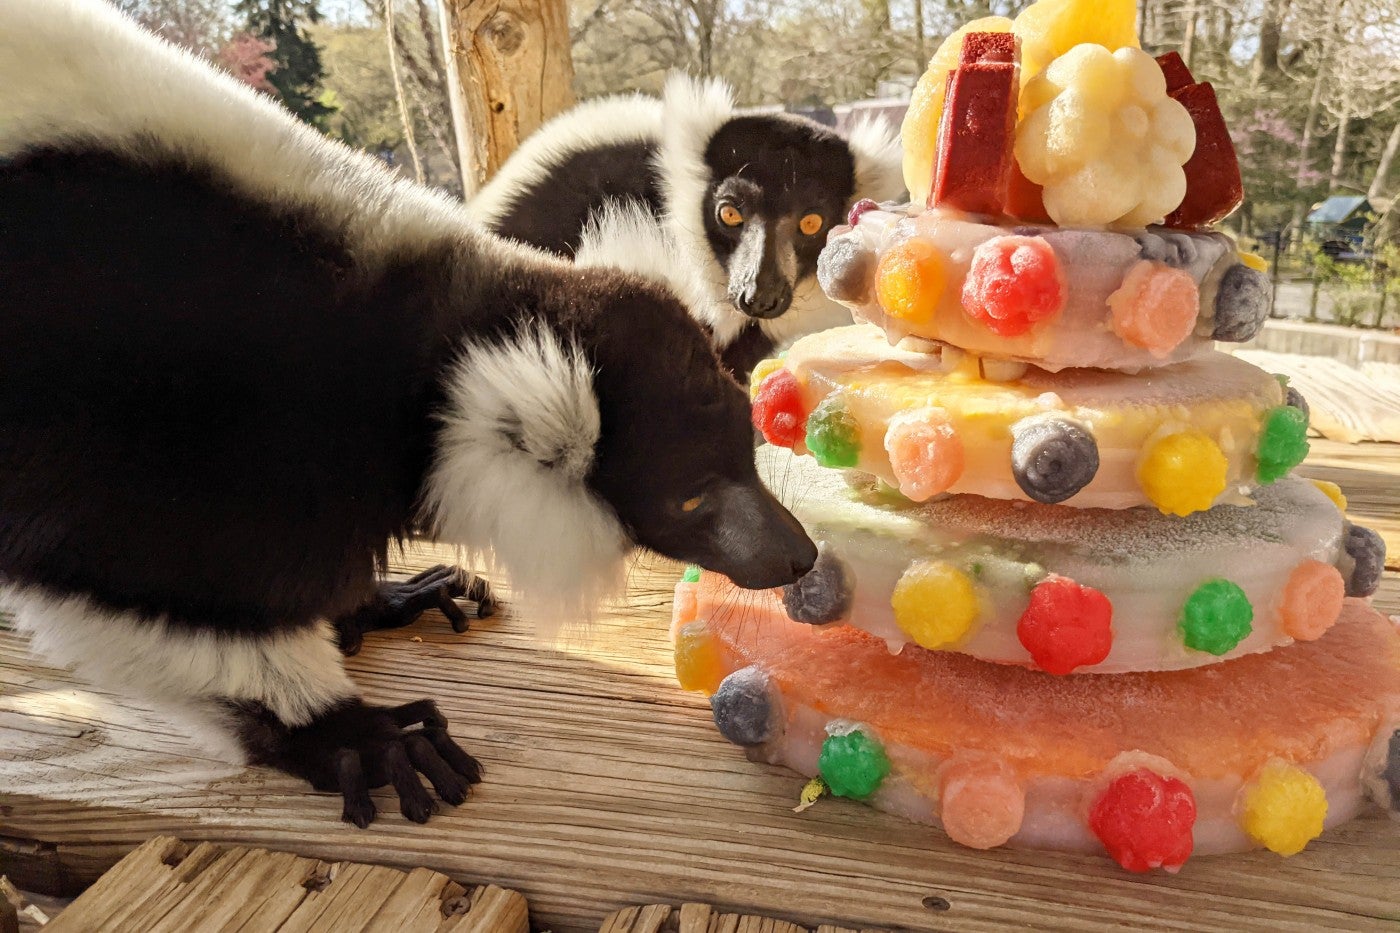 Black-and-white ruffed lemurs eat a four-tiered fruitsicle cake for their birthdays.